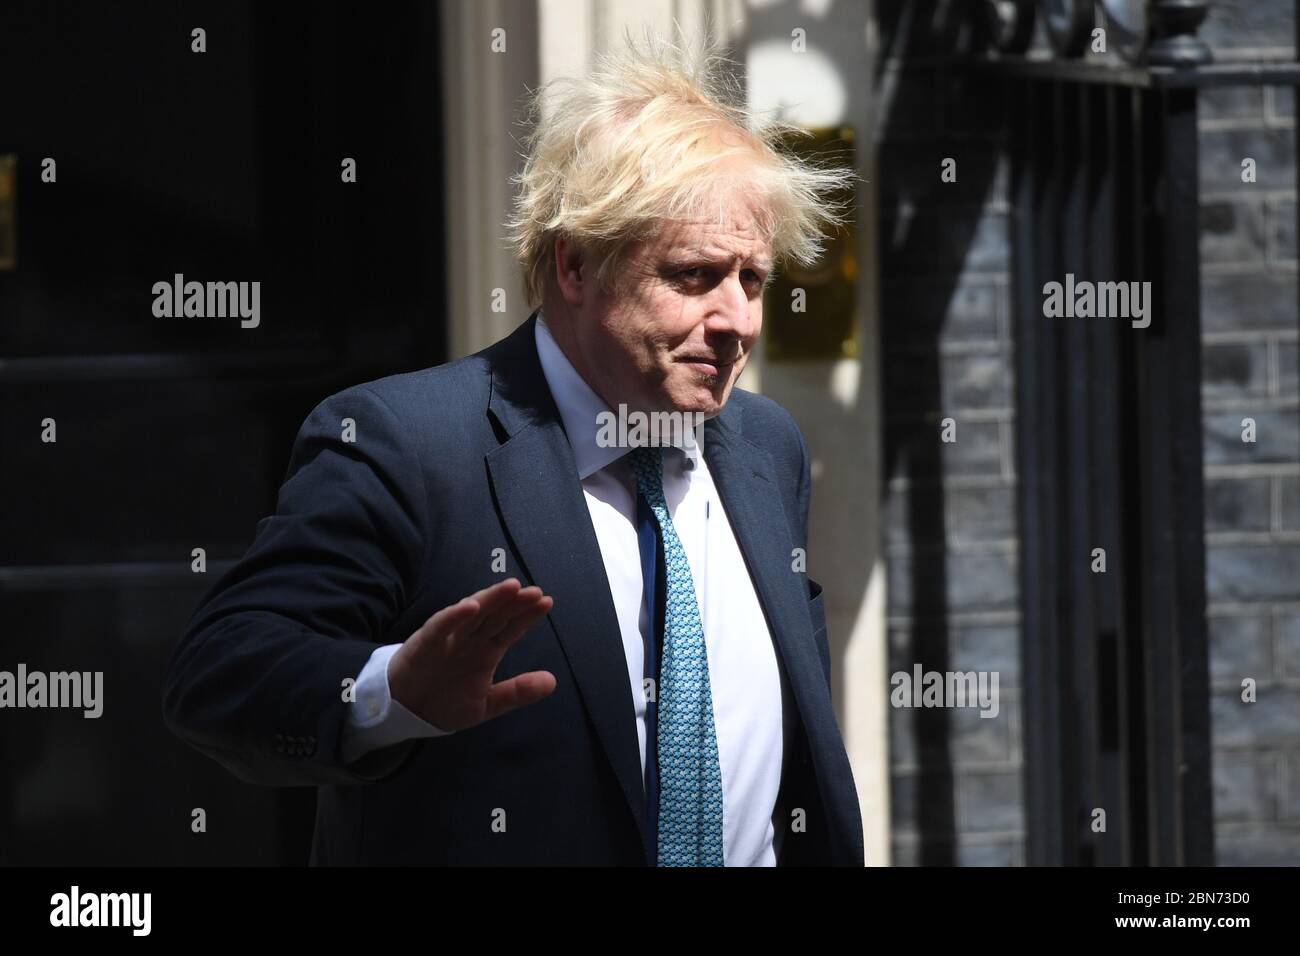 Prime Minister Boris Johnson leaves 10 Downing Street, London, for PMQs in the House of Commons, on the first day of the easing of coronavirus restrictions to bring the country out of lockdown. Stock Photo